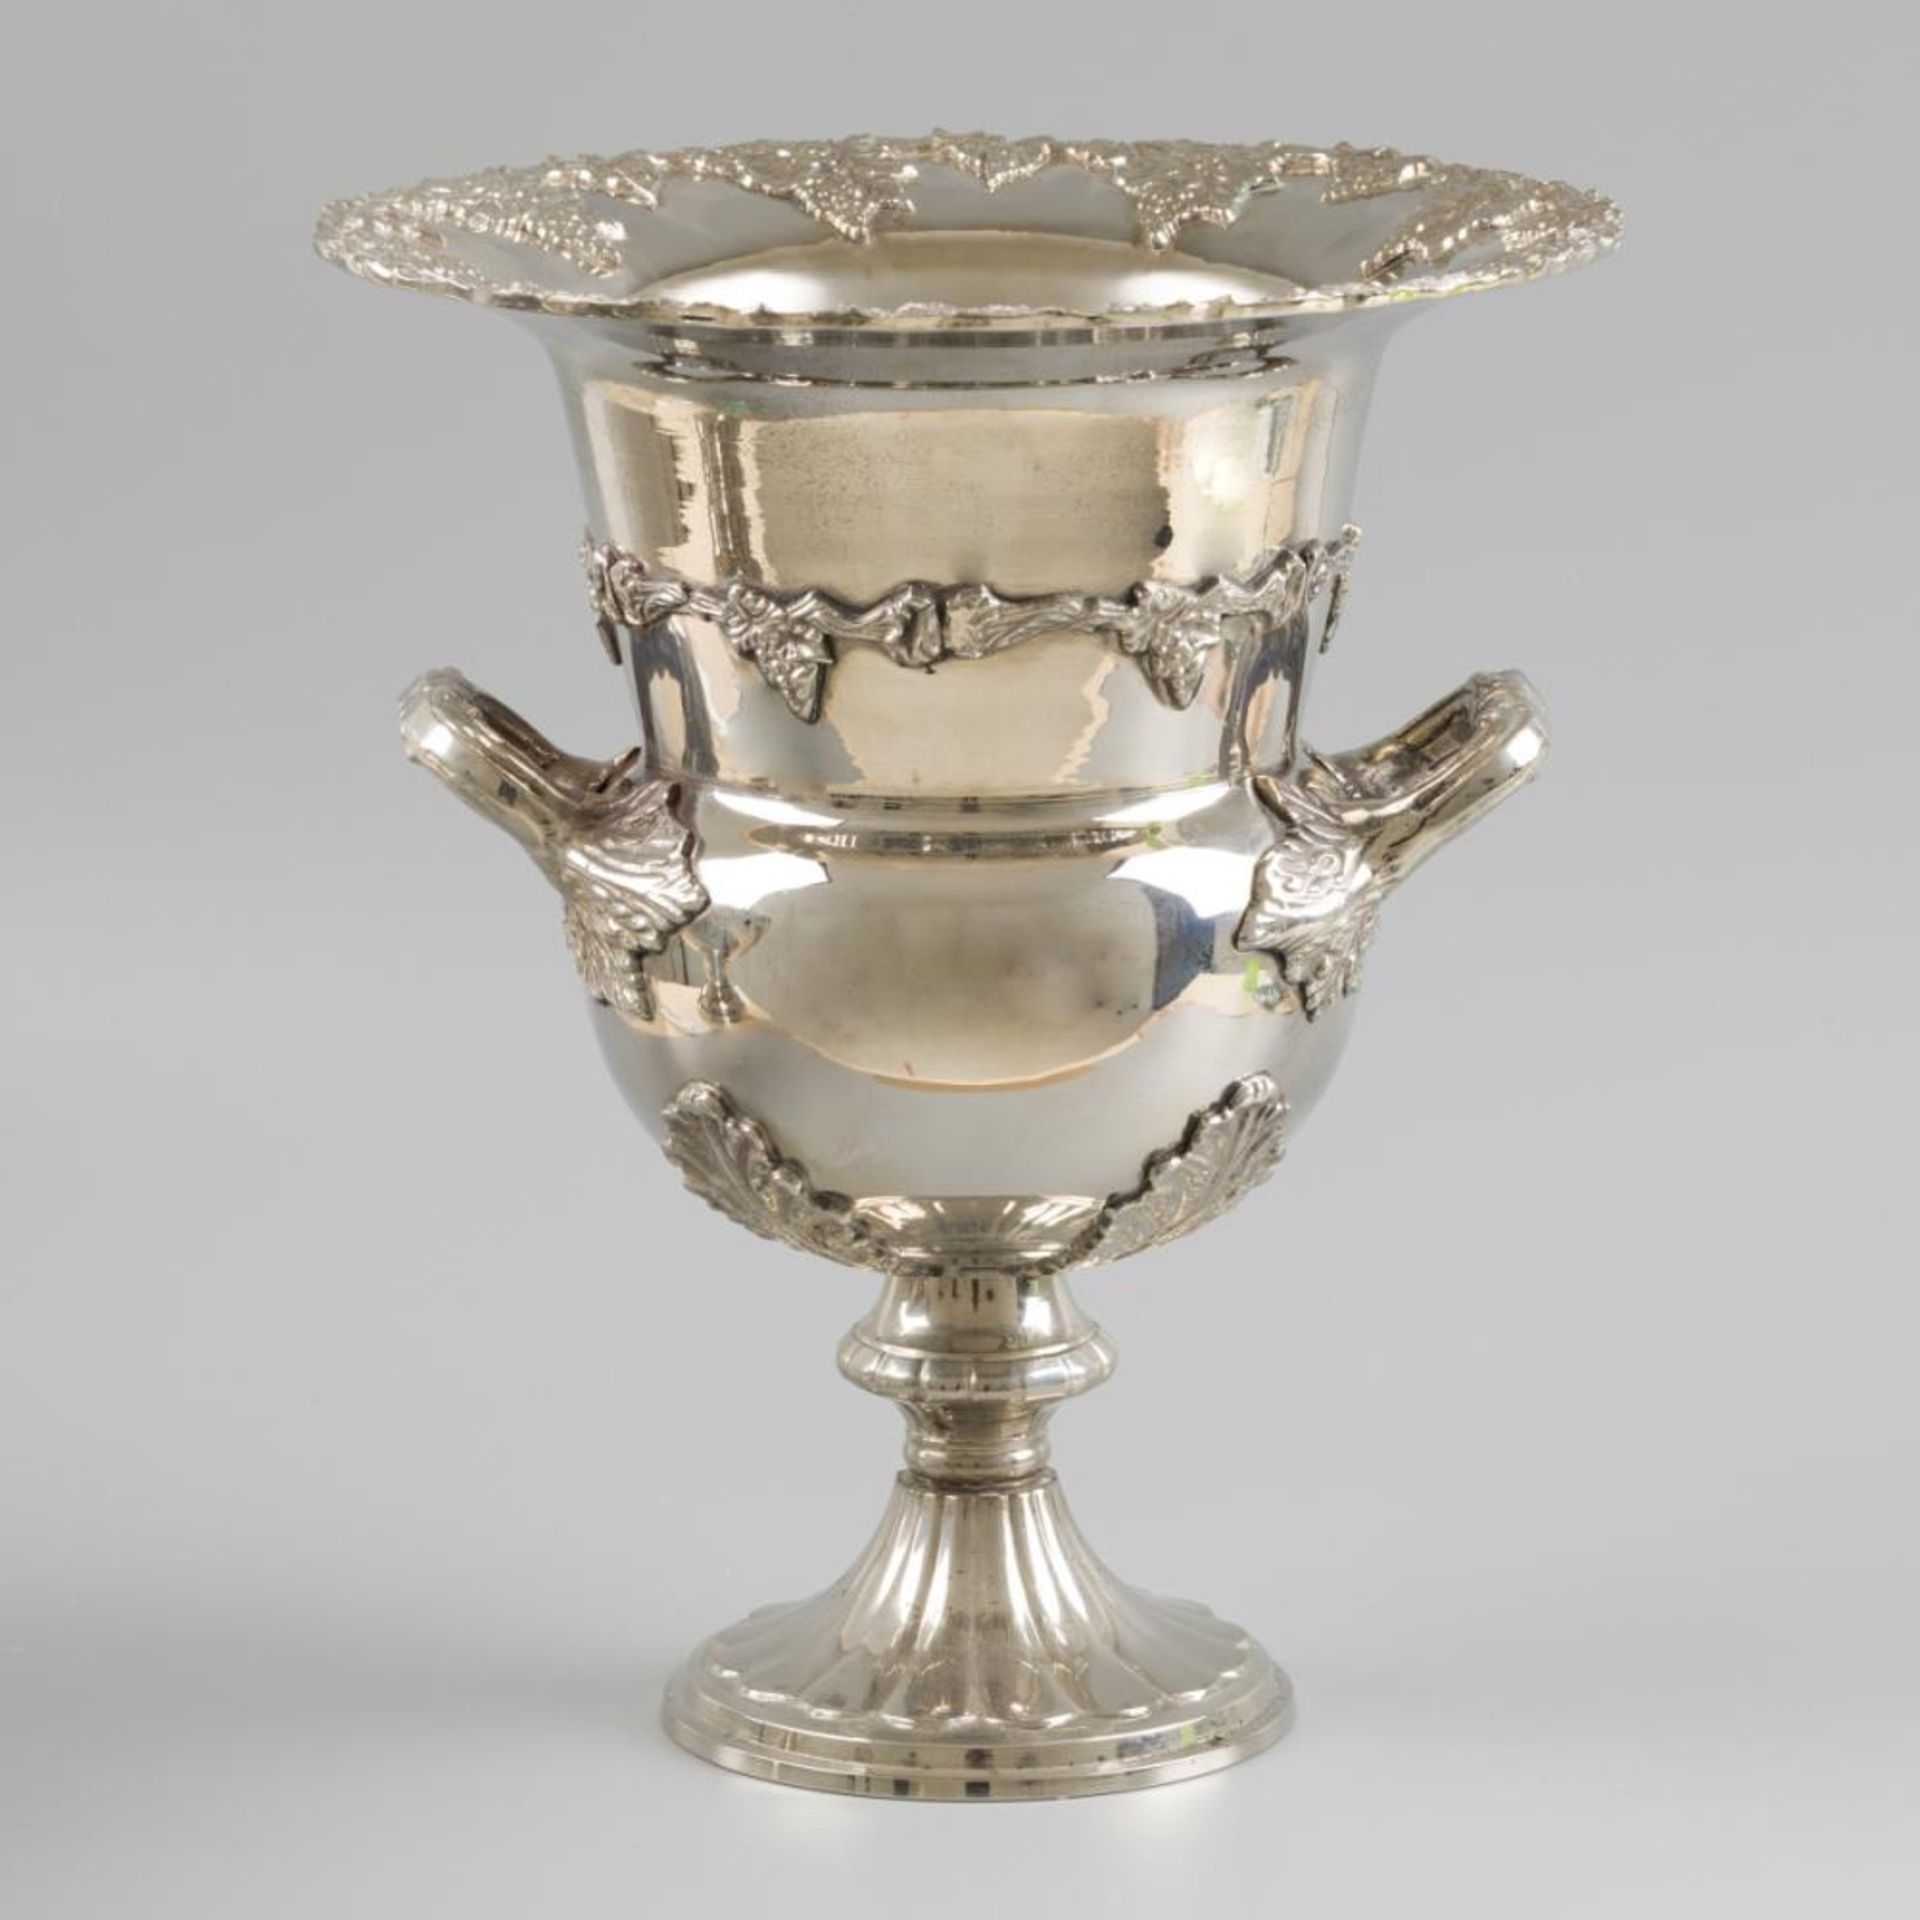 A silver-plated champagne cooler with two handles and decorated with bunches of grapes. England, lat